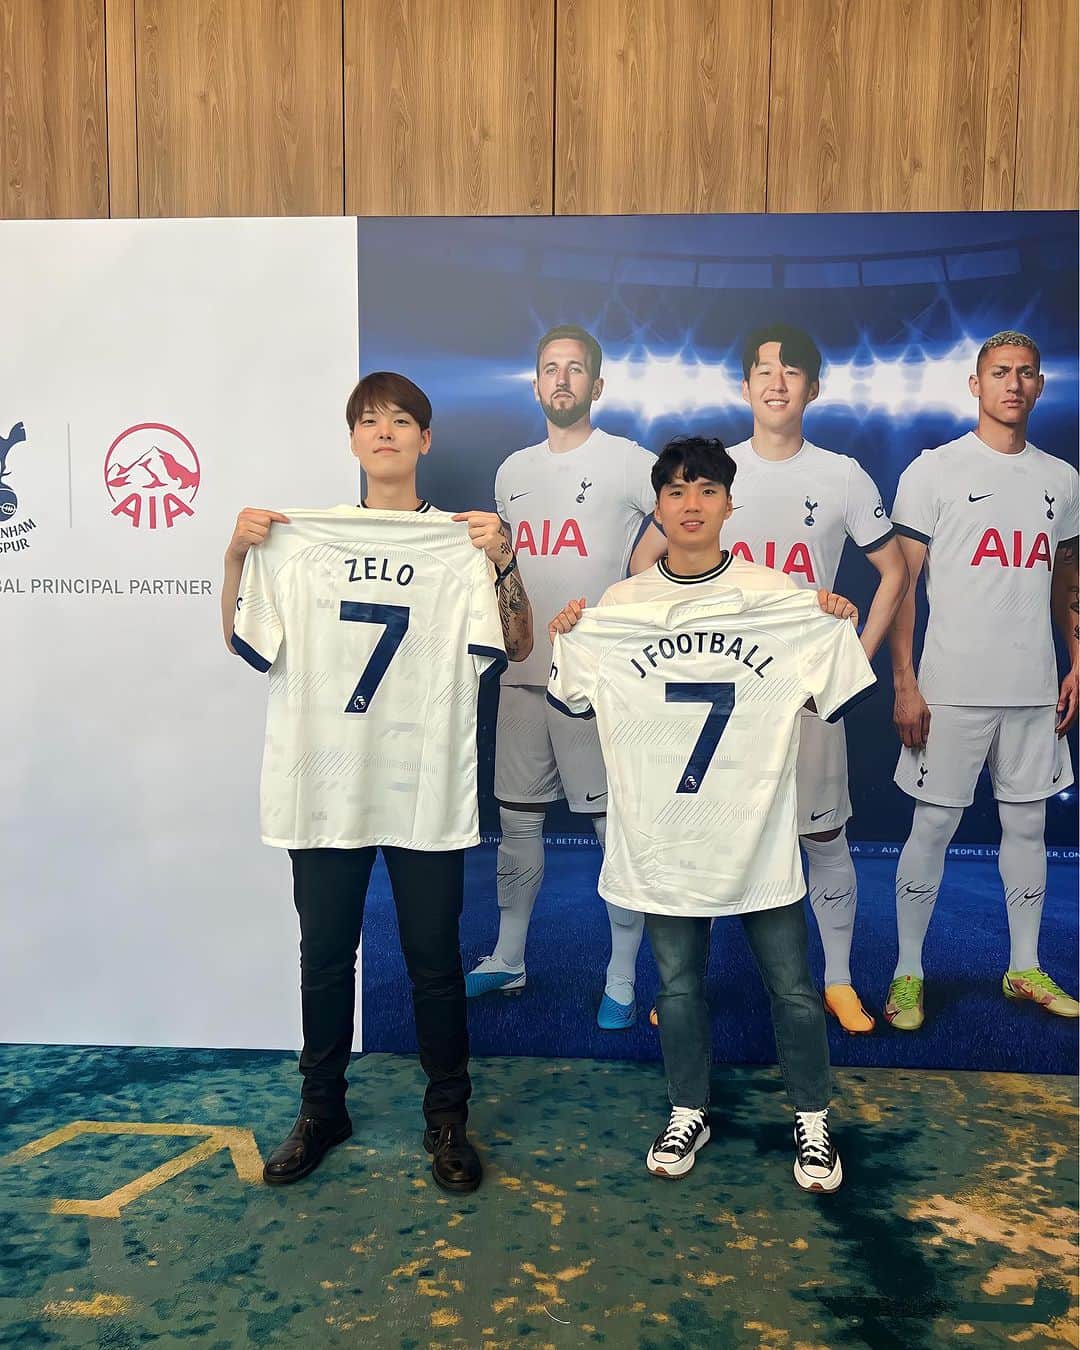 ZELO さんのインスタグラム写真 - (ZELO Instagram)「With @richarlison @emerson_royal and @spursofficial 💙🩶 Thanks @aiaspurshubkr!   Now, one lucky fan will also be able to go to LONDON to have the #AIAOnlyExperience !! You can watch the Tottenham Hotspur match from the amazing AIA VVIP Suite Box, do the Stadium Tour, take on the Skywalk, and even possibly go to the Tottenham Hotspur training ground and meet the players and get autographs firsthand! Please follow @aiaspurshubkr and participate in the AIA Spurs Fan-Creator Event for a chance to have a lifetime experience in 🇬🇧   ⚽️ How to participate 1. Follow @byzelo 2. Follow @aiaspurshubkr 3. Enter in the event link on the profile section of @aiaspurshubkr Link: https://aiaspurs.com/kr/event1  4. Tag three friends in the comments section of this post   히샬리송 & 에메르송 선수와 함께!! @aiaspurshubkr 감사드립니다!   이제 행운의 팬분 한명도 런던에서 저와 같은 기회를 받을 수 있다고 합니다. AIA생명 VVIP 스위트에서 토트넘 홋스퍼 경기 직관, 스타디움 투어, 스카이워크, 그리고 선수들을 트레이닝 그라운드에서 직접 만나고 싸인 받을 수 있는 기회까지 제공한다니, @aiaspurshubkr 팔로우해 주시고 AIA Spurs 팬 크레이터 이벤트에 많은 참여 부탁드립니다! 🇬🇧   ⚽️ 참여방법 1. @byzelo 팔로우 하기 2. @aiaspurshubkr 팔로우 하기 3. @aiaspurshubkr 에서 이벤트 응모하기 (프로필 링크 클릭) 페이지 바로가기: https://aiaspurs.com/kr/event1  4. 본 게시물 댓글에 친구 3명 이상 태그  #AIA #토트넘 #AIASpursHub #AIAonlyexperience #AIA생명 #TottenhamHotspur #손흥민」8月17日 22時00分 - byzelo